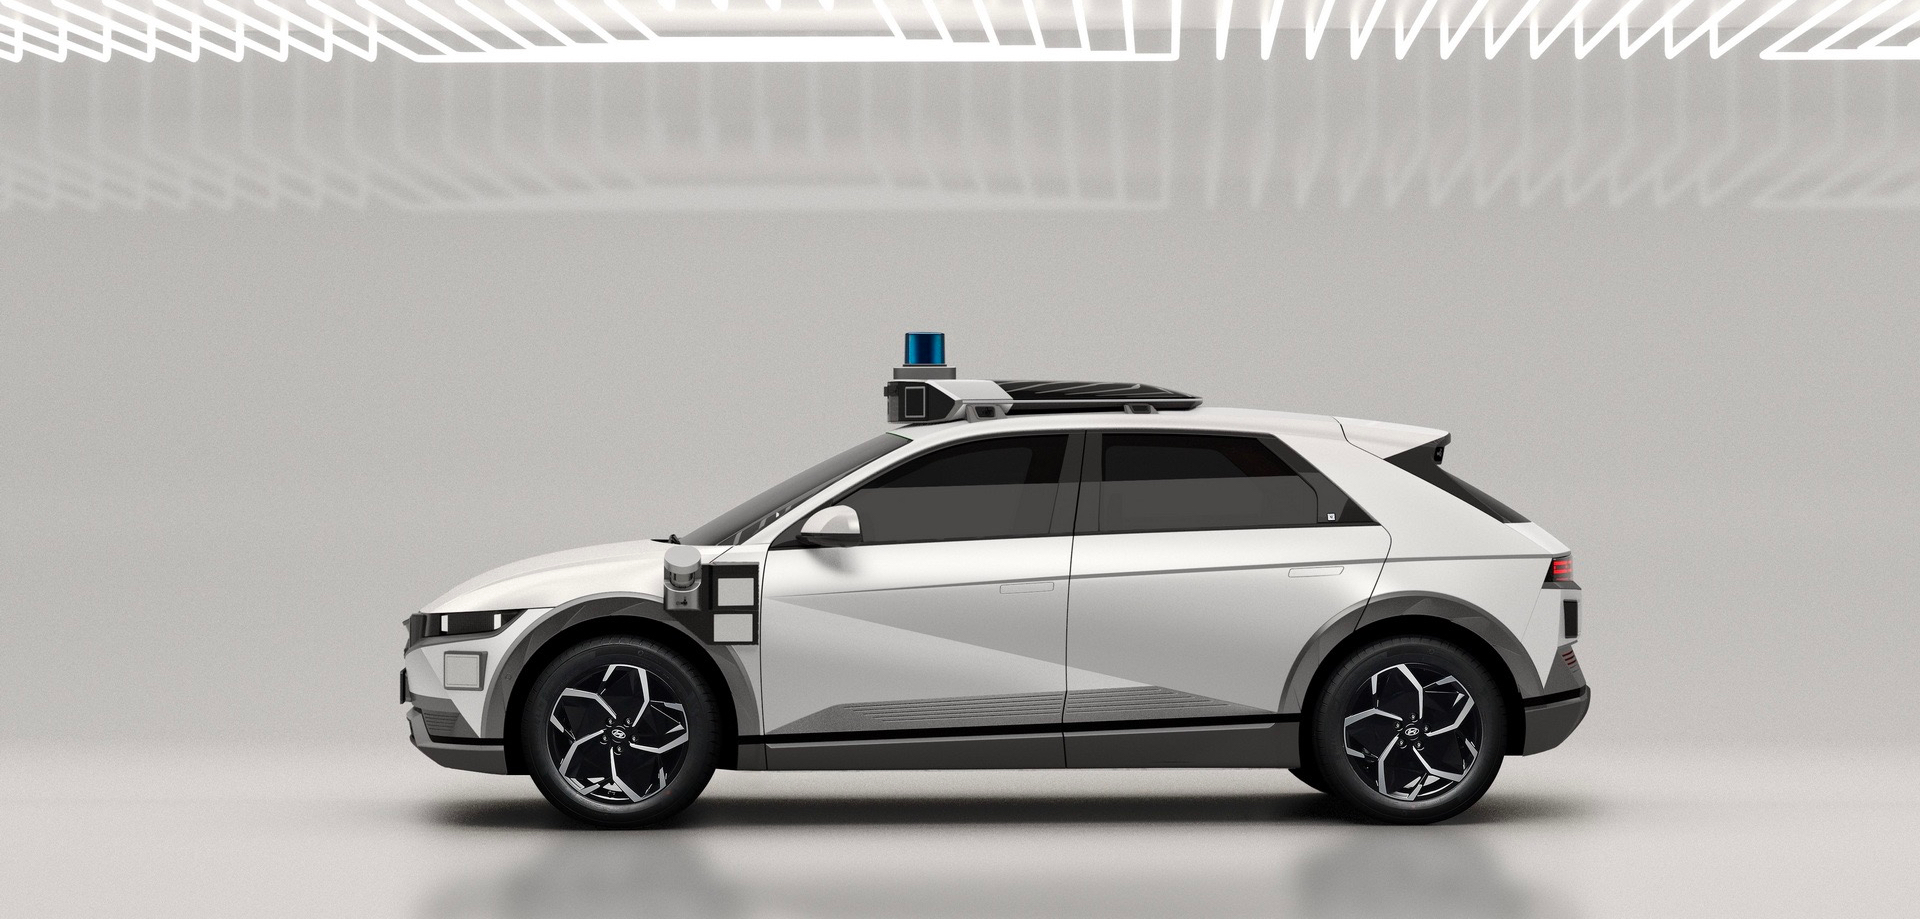 The modern autonomous vehicles have arrived, and they are expected to begin carrying passengers as soon as next year.